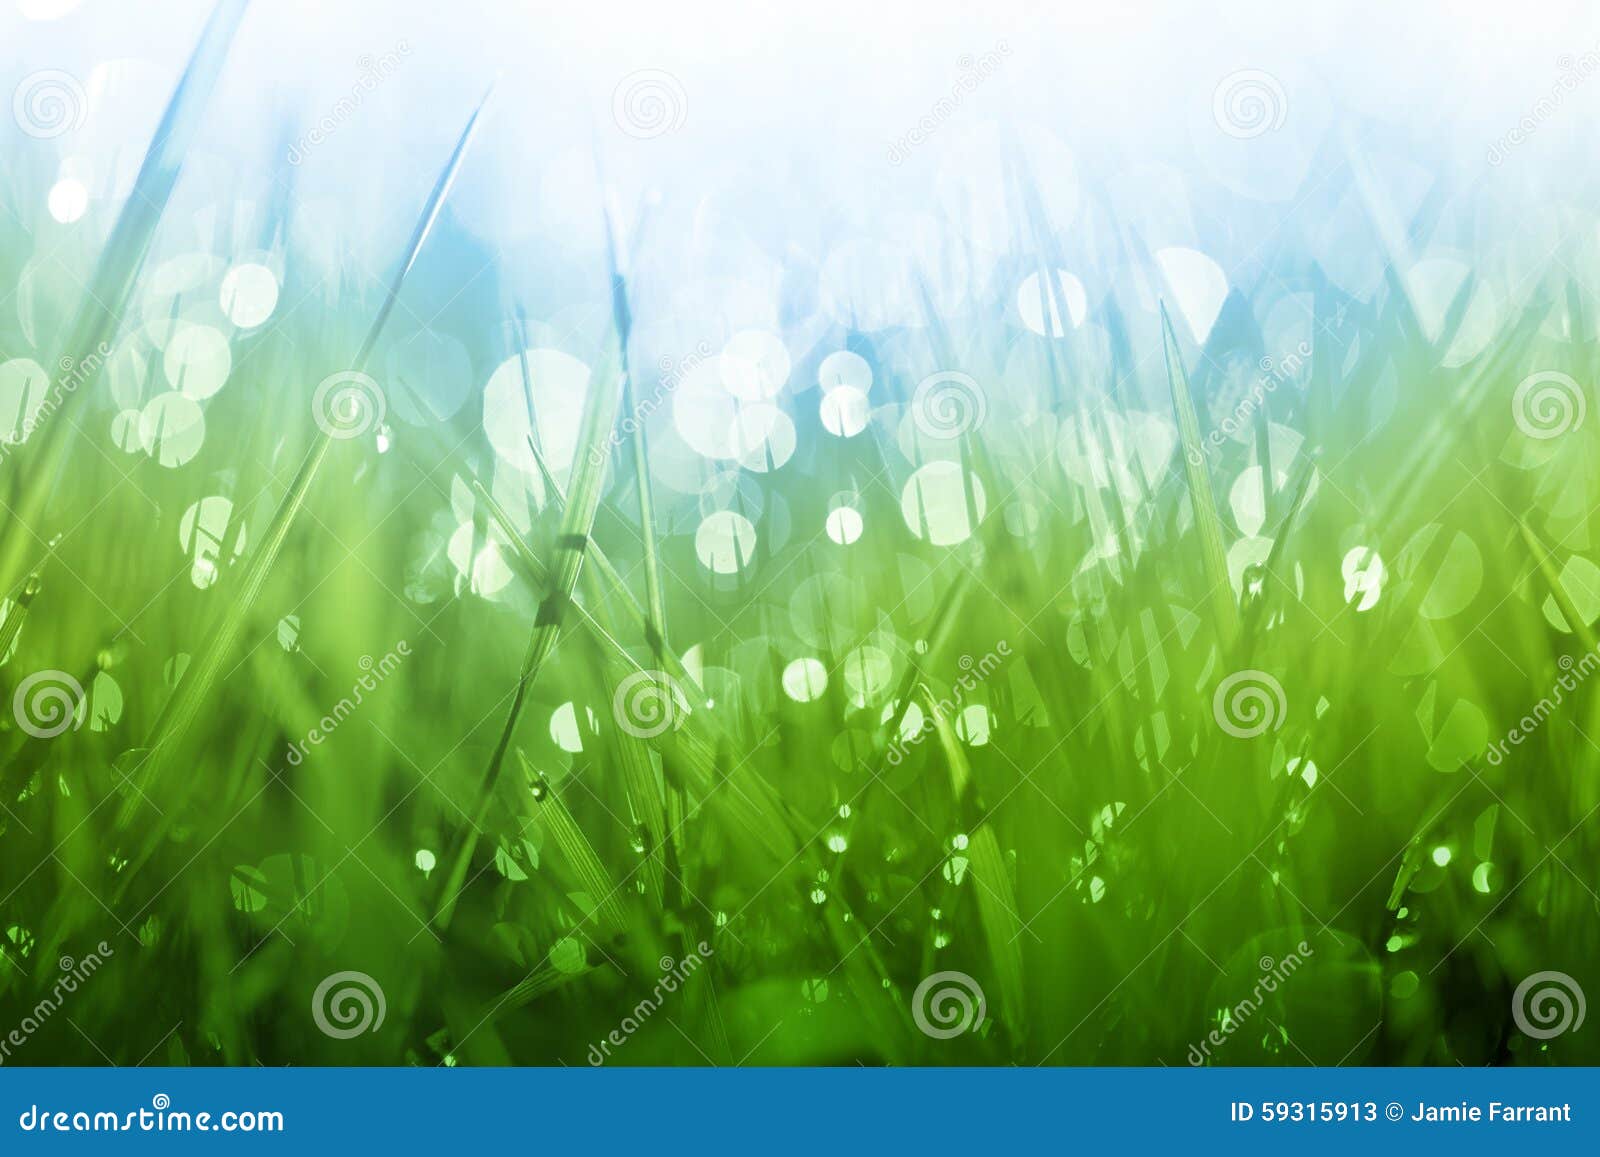 Lush Green Grass Background Stock Image - Image of grass, agriculture